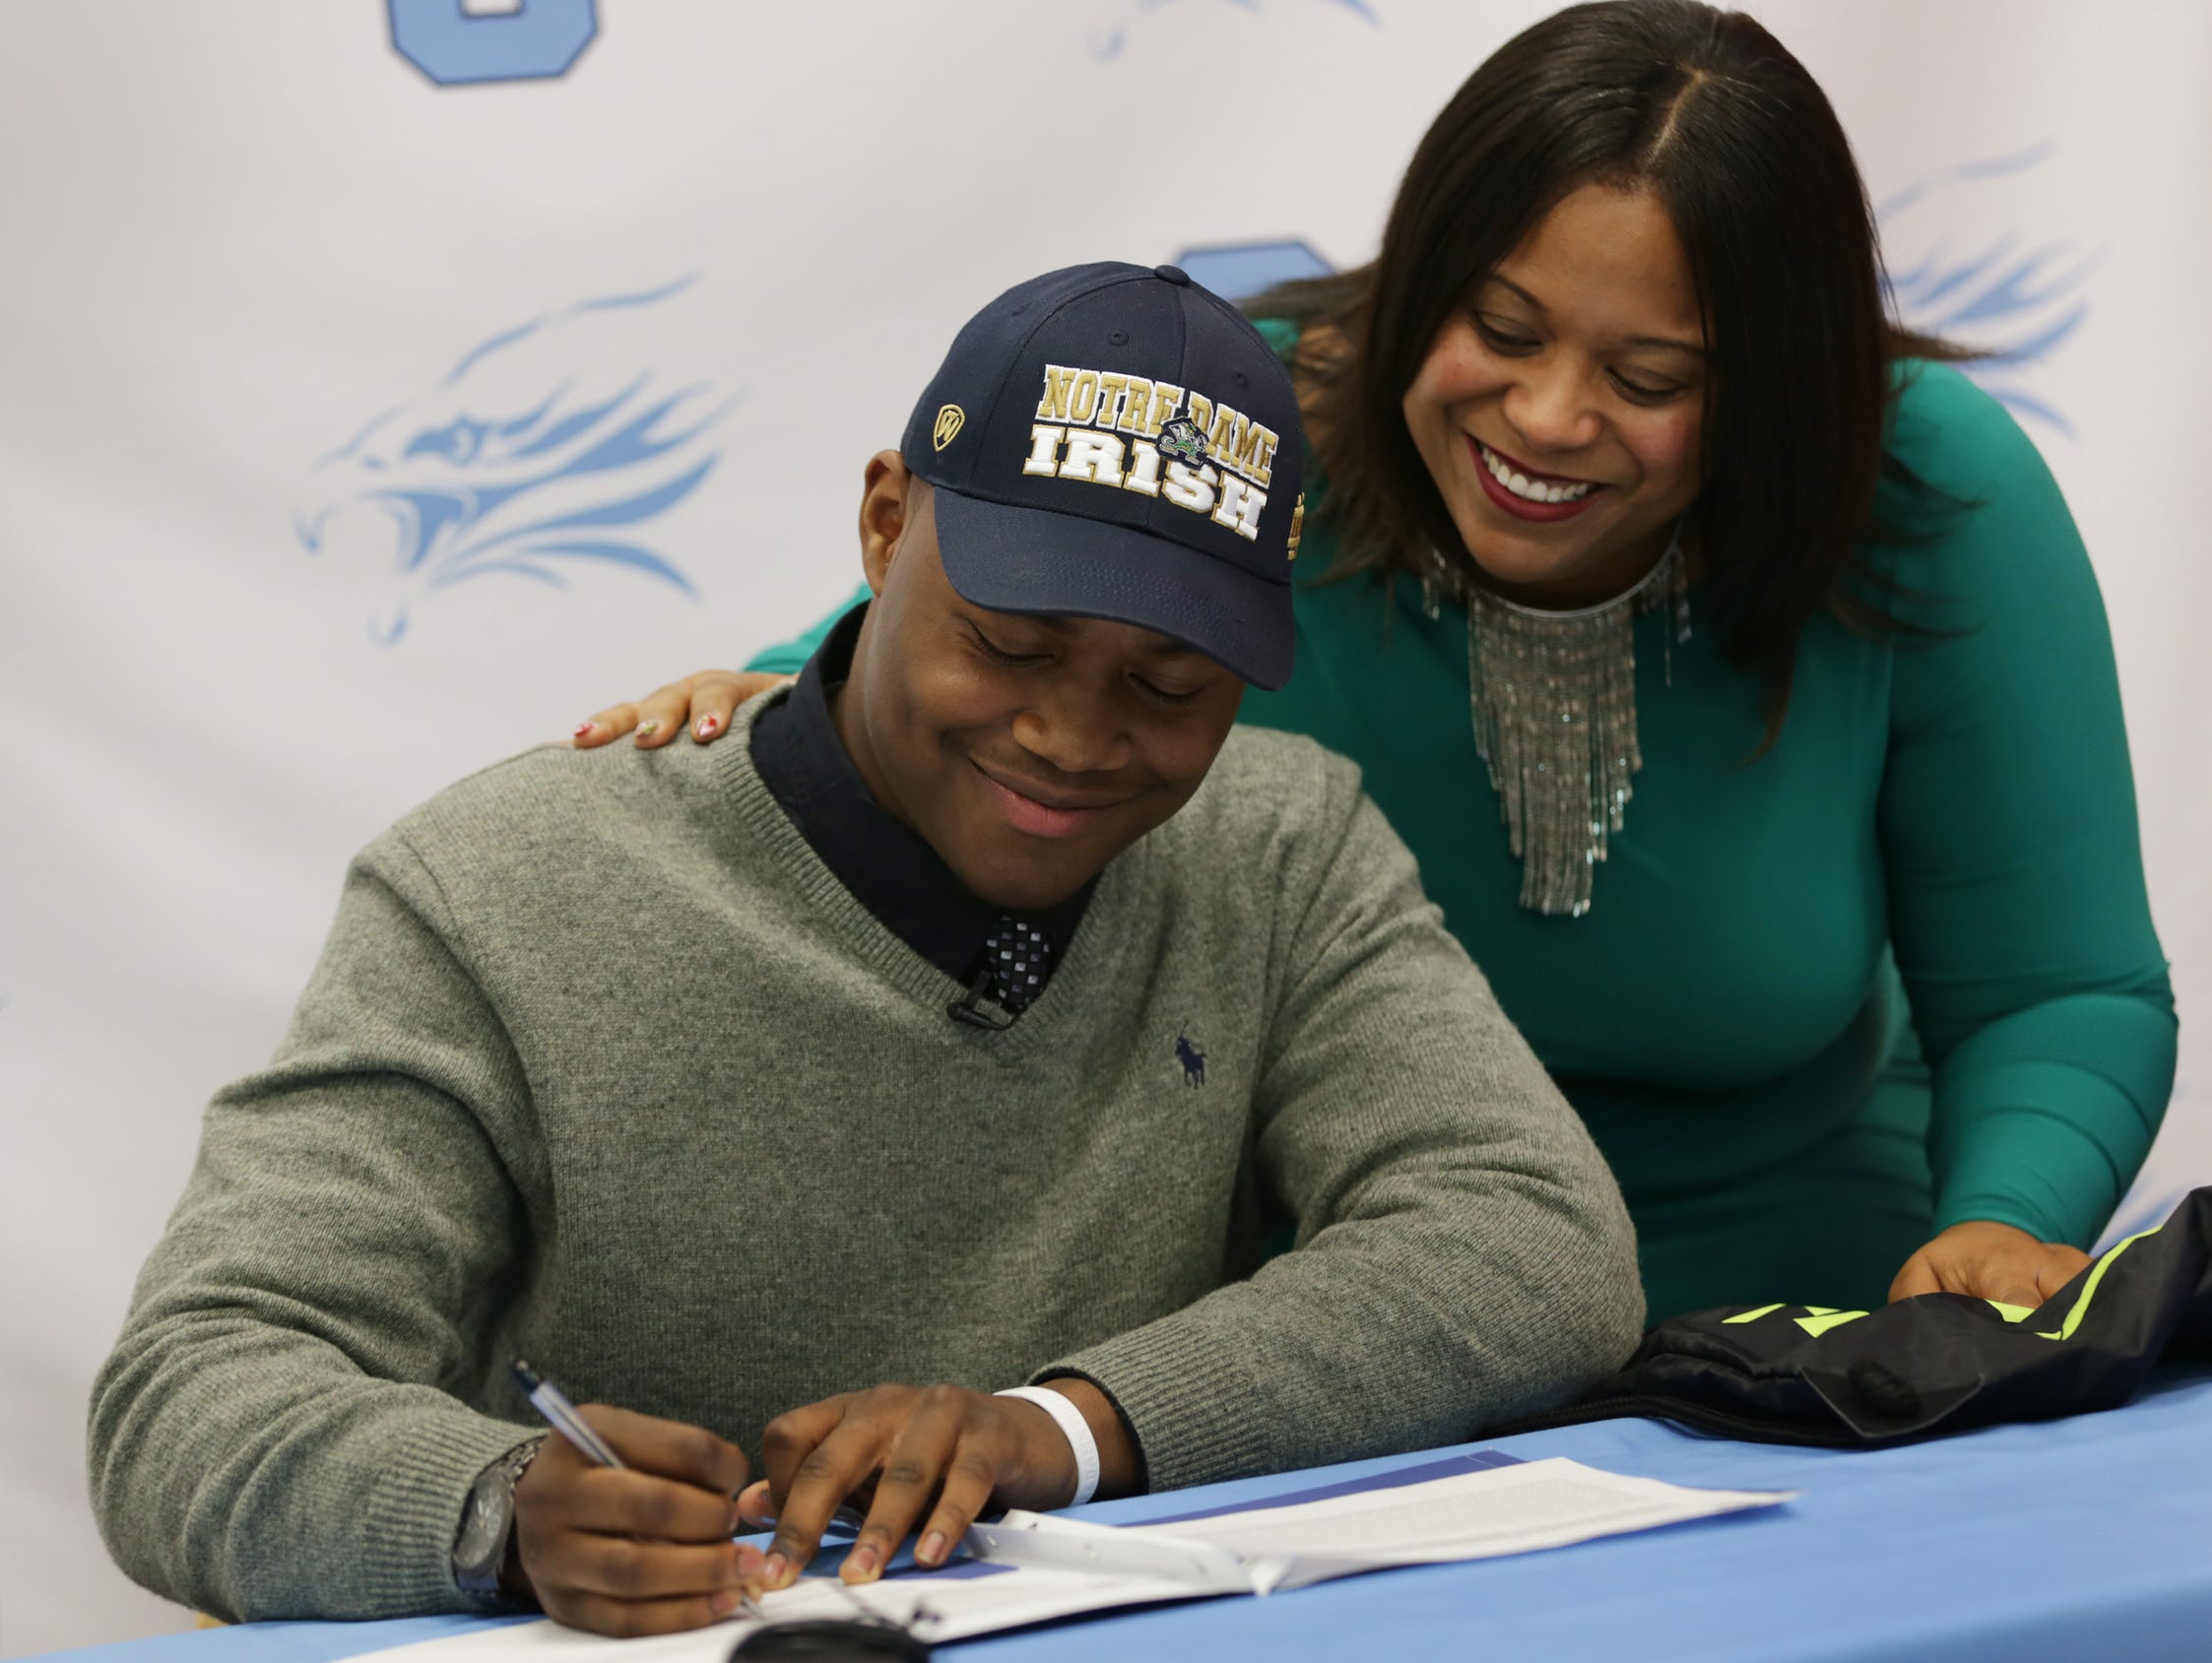 Linebacker Daelin Hayes, left, and his mother, Lakeshia Neal, smile after Hayes committed to Notre Dame at Skyline High School in Ann Arbor on Thursday, Dec. 10, 2015.